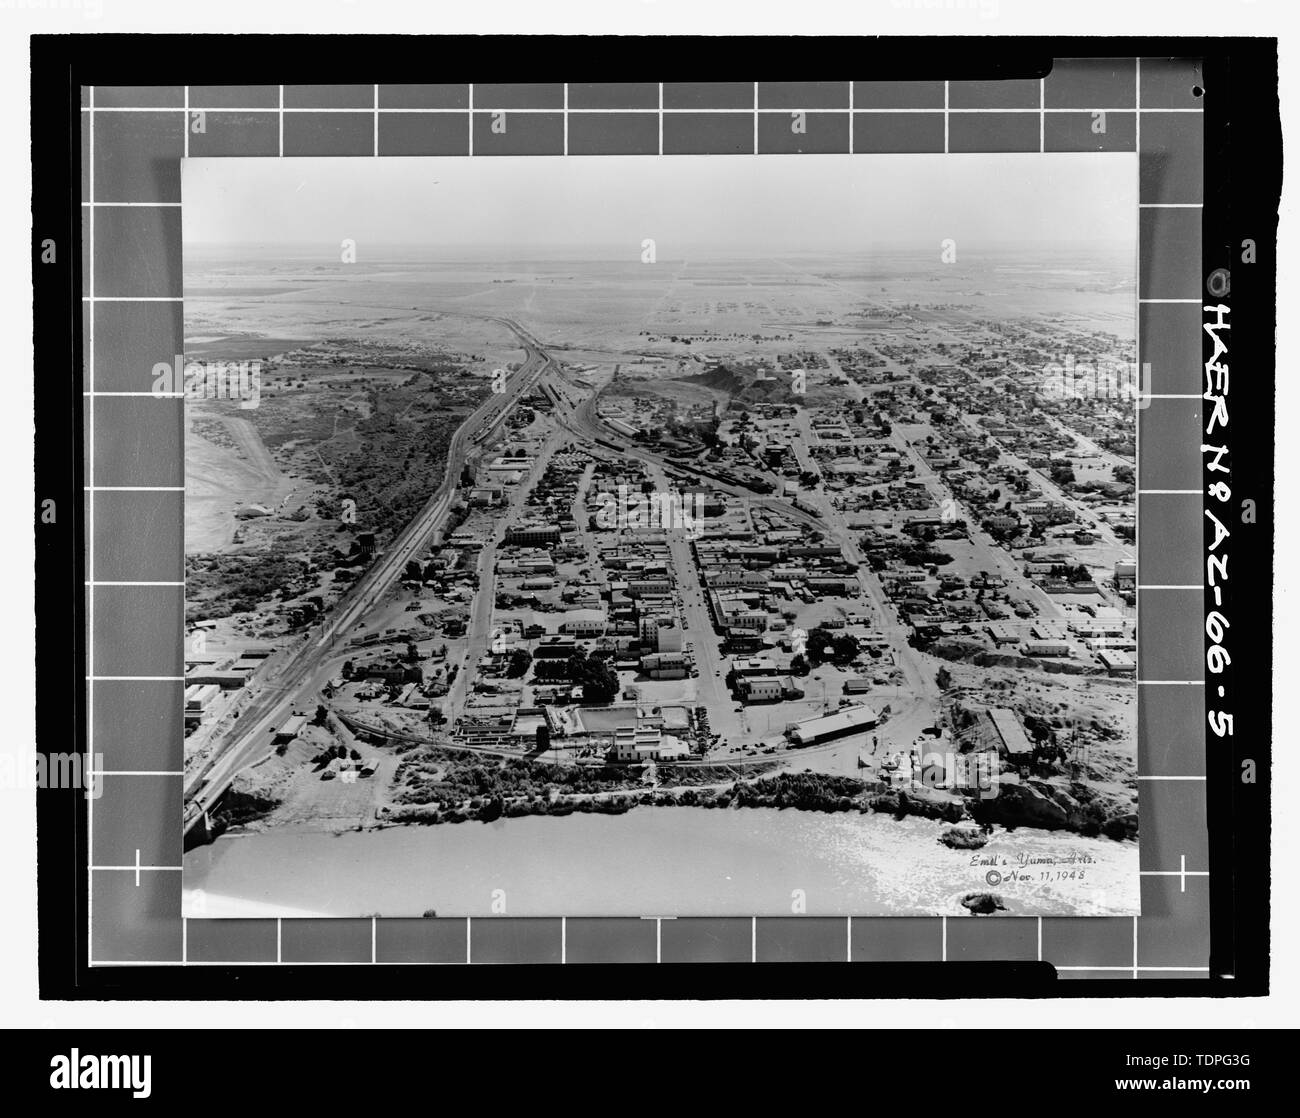 (original print in collection of Gerald A. Doyle, Phoenix) Emil Eger, Photographer, November 11, 1948.  AERIAL VIEW LOOKING SOUTH OF THE YUMA CROSSING. THE SPRR WATER SETTLING RESERVOIR IS ON THE HILLOCK AT THE BOTTOM RIGHT CORNER OF THE IMAGE. THE LOCATION OF THE SPRR BRIDGES AT MADISON AVENUE IS MARKED BY THE TWO PIERS IN THE RIVER. THE CIRCULAR FOUNDATION OF THE SWING SPAN IS ON THE SHORELINE IMMEDIATELY BEYOND THE SECOND PIER. THE RESERVOIR ROOF IS INTACT. - Southern Pacific Railroad Water Settling Reservoir, Yuma Crossing, south bank of Colorado River at foot of Madison Avenue, Yuma, Yuma Stock Photo